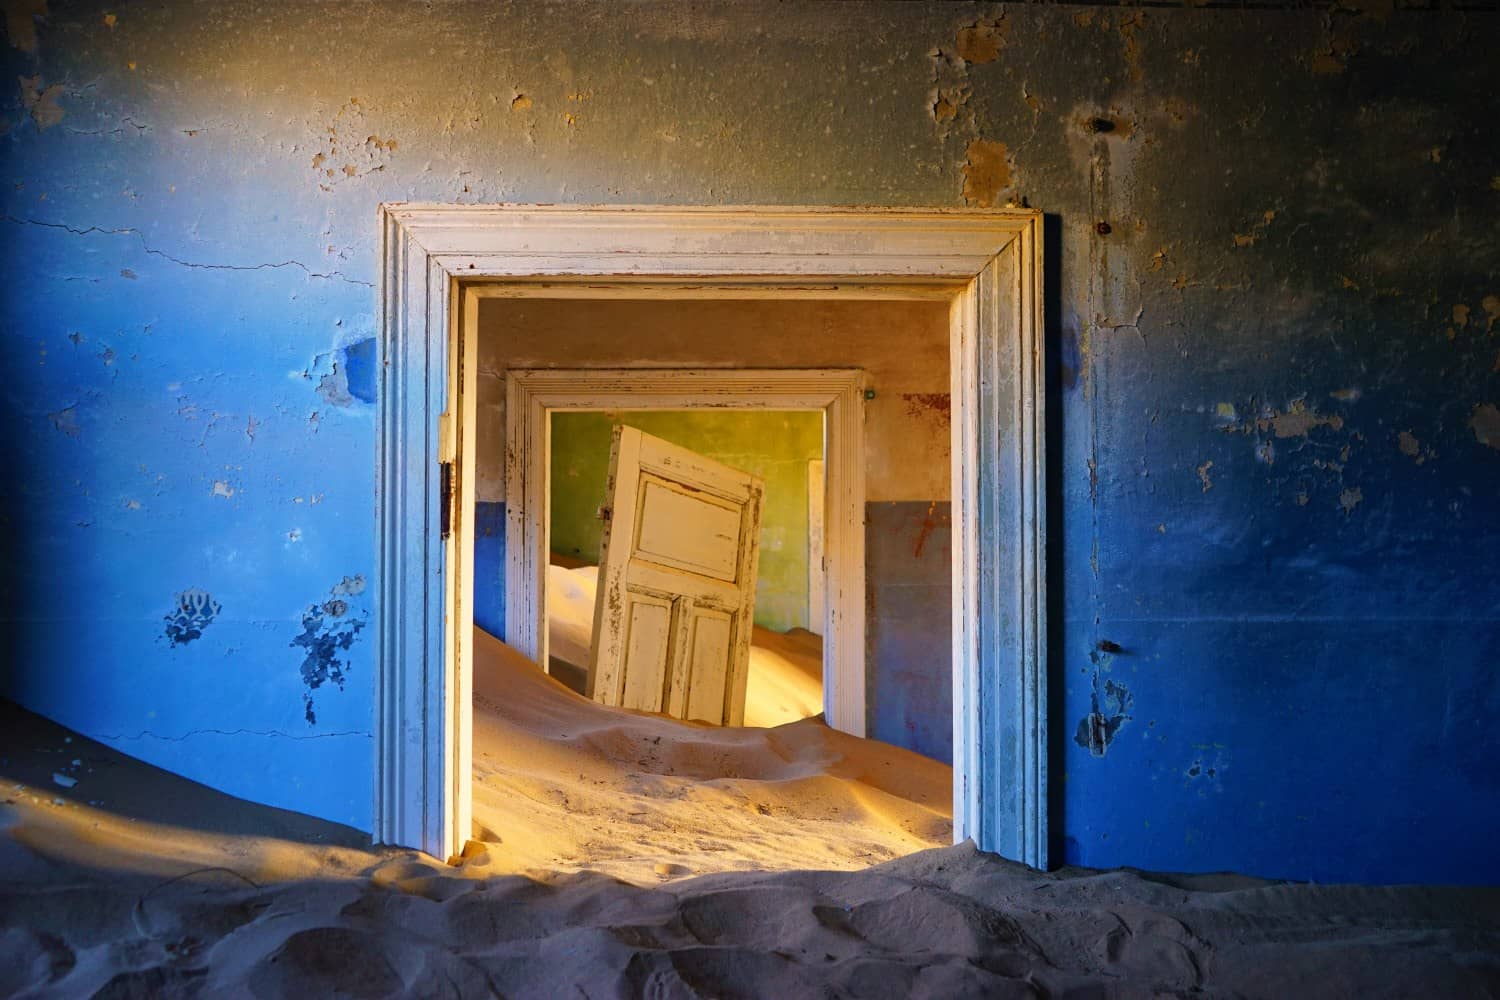 Looking through two doorways with sand covering the floor and climbing up the walls inside a blue-painted house in Kolmanskop, Namibia. A door is standing suspended in the sand, off its hinges.